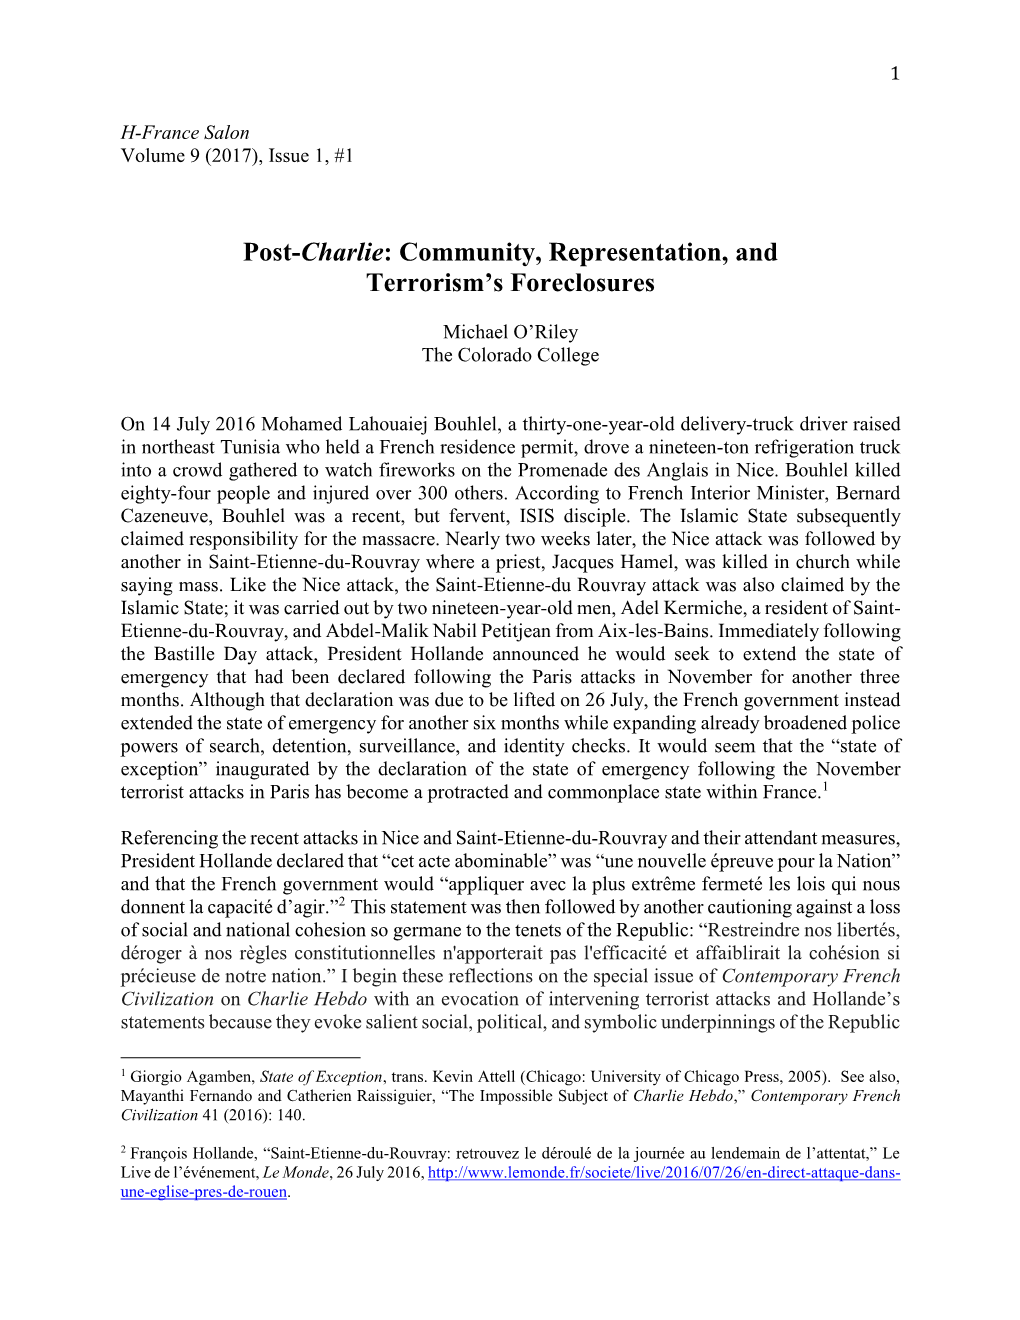 Post-Charlie: Community, Representation, and Terrorism’S Foreclosures